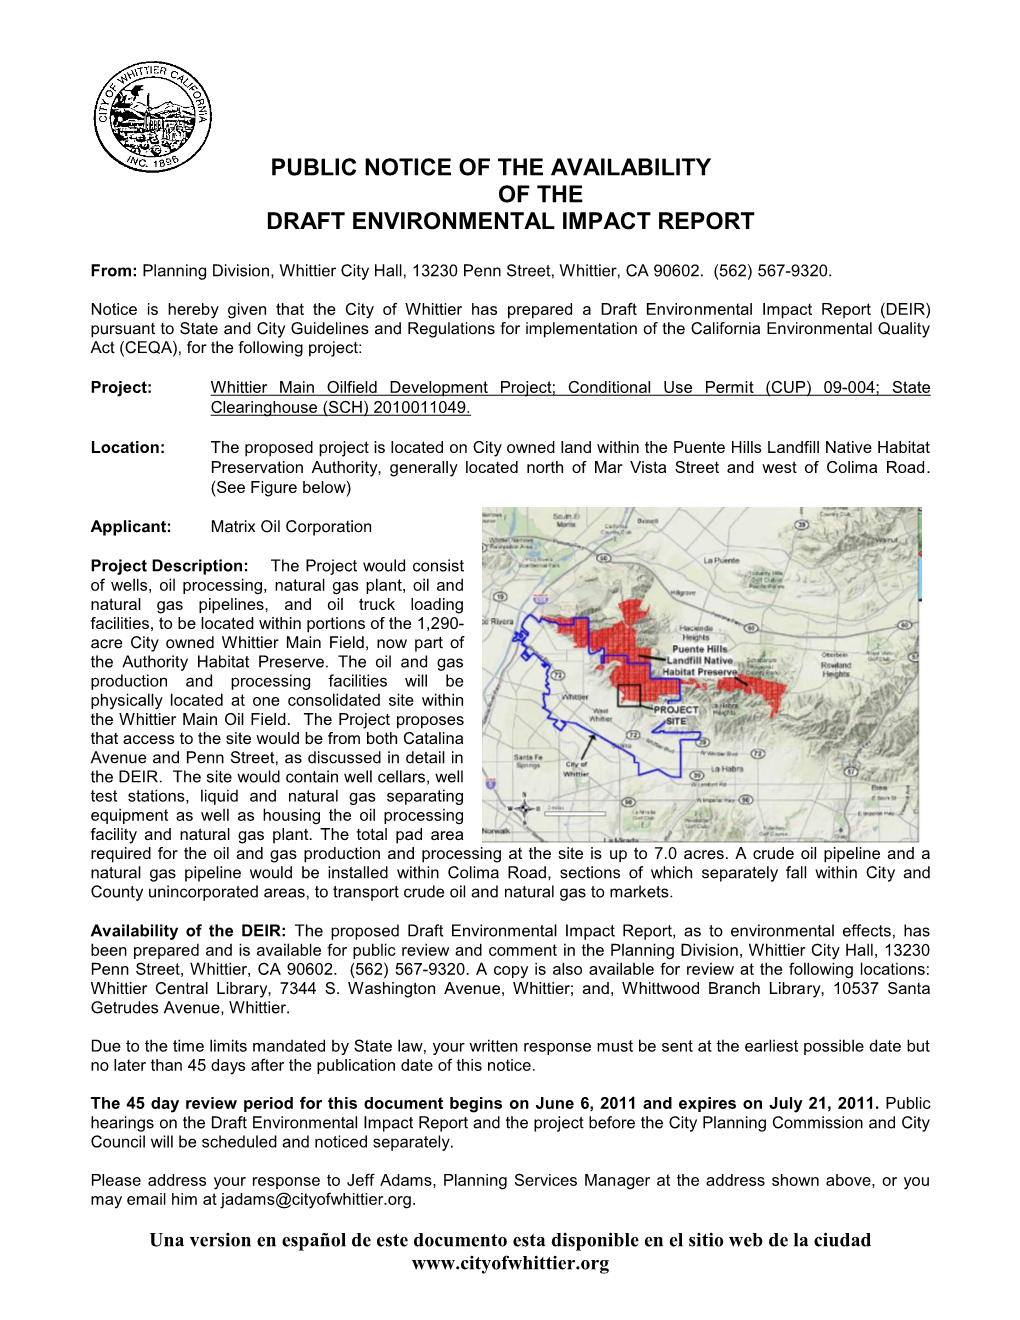 Public Notice of the Availability of the Draft Environmental Impact Report